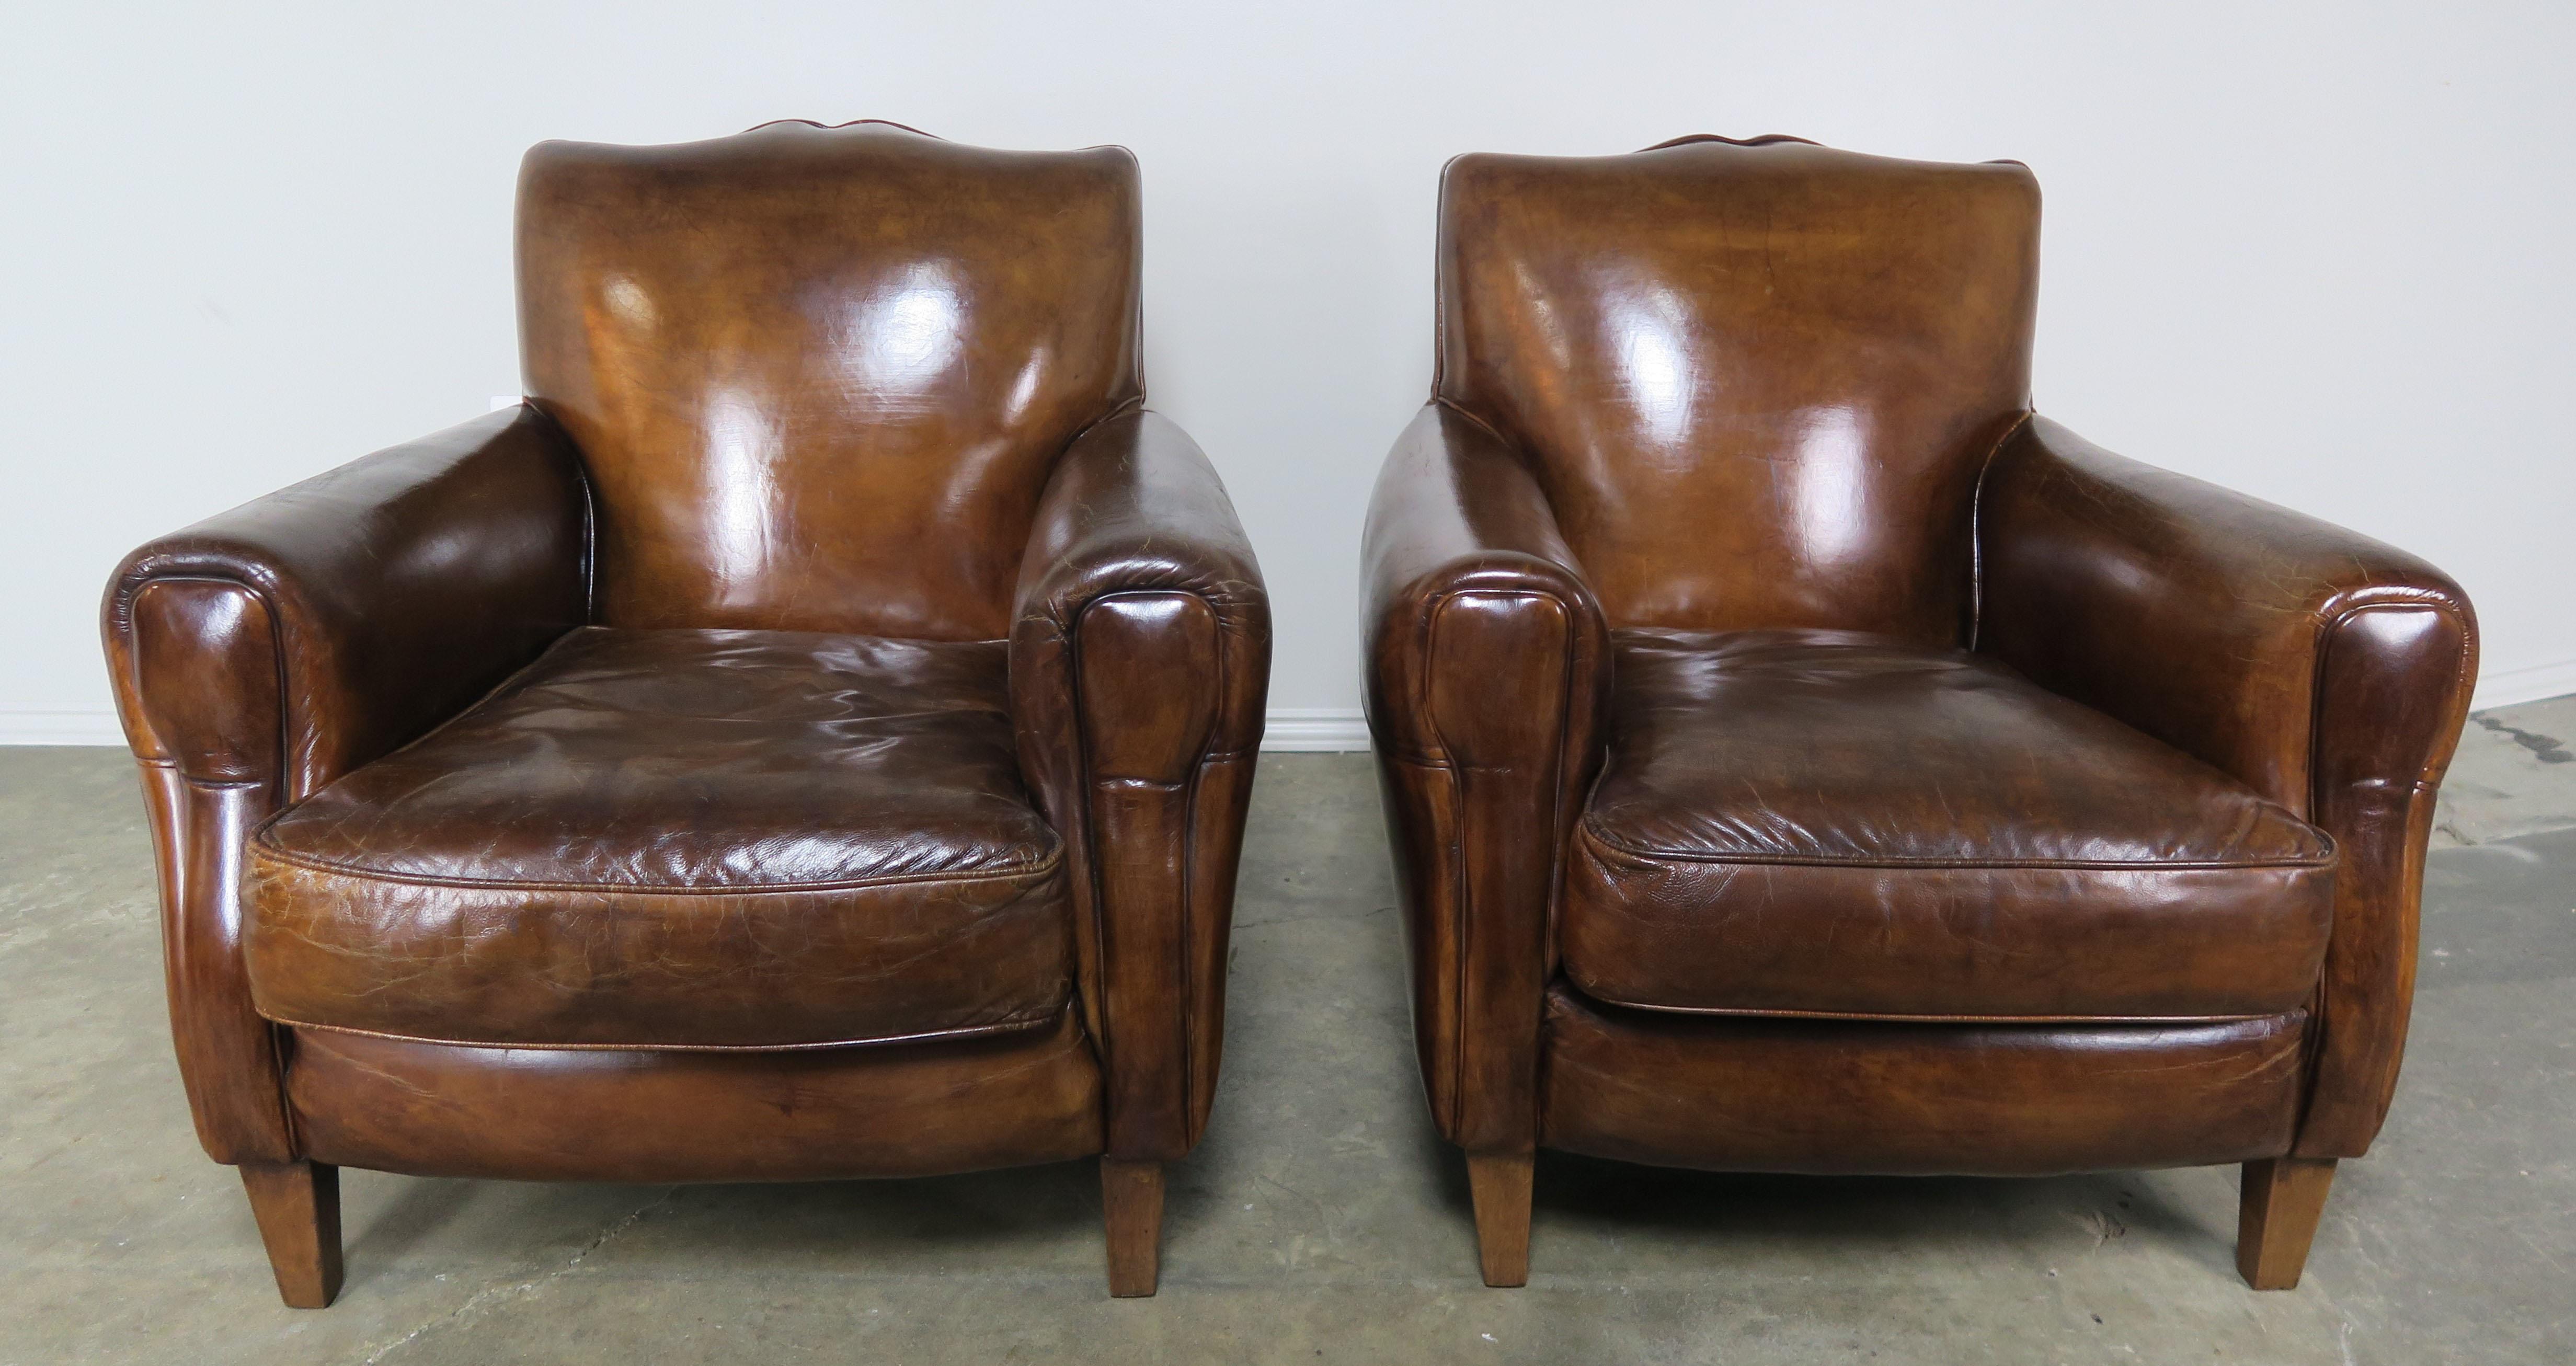 Pair of handsome French deco style mustache-shaped club chairs with loose seat cushions. The leather is a beautiful shade of tobacco and in excellent overall condition. Baseball stitching and self-piping throughout. The armchairs stand on four